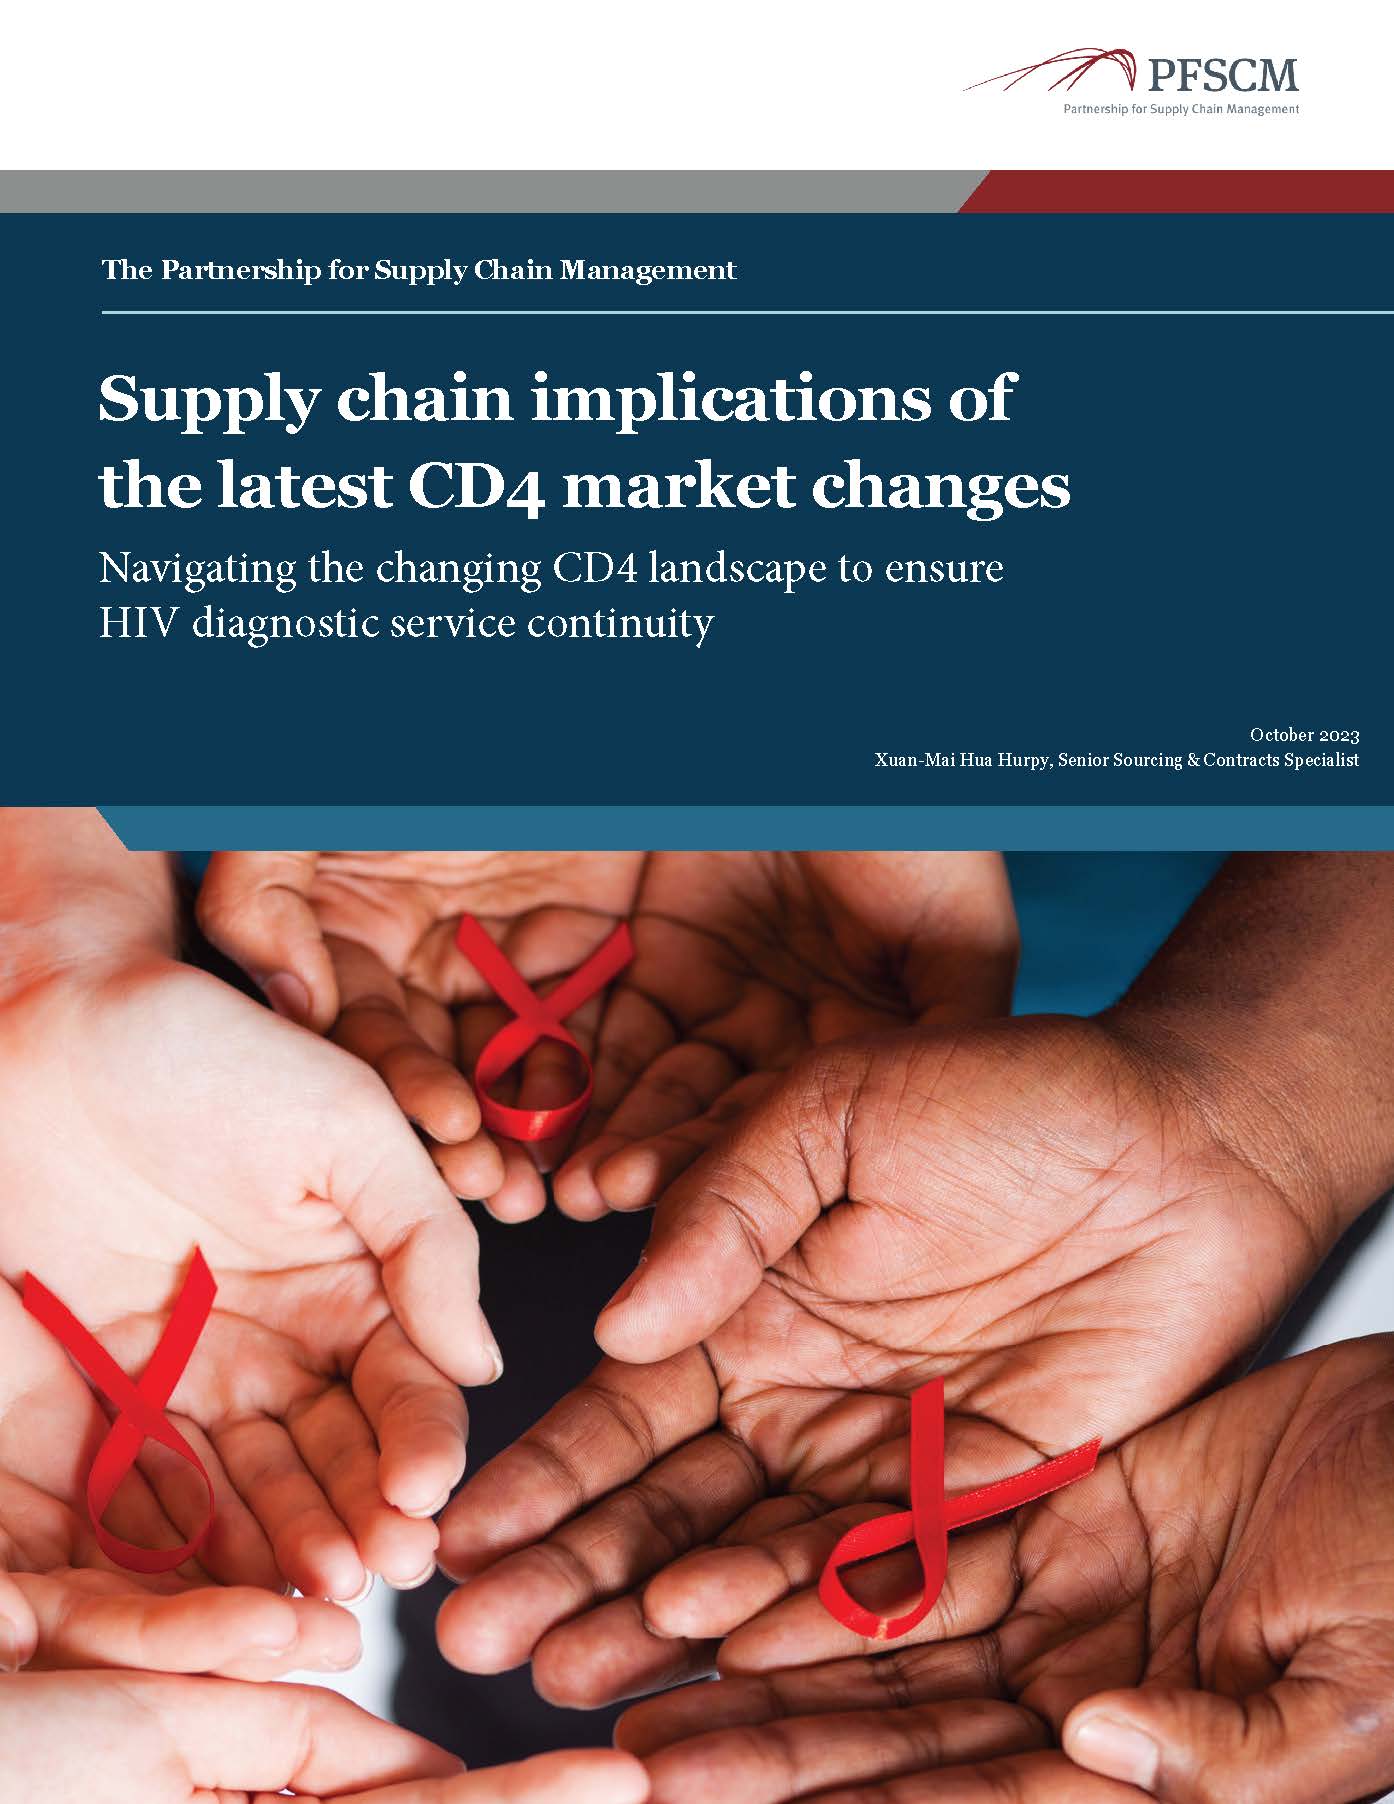 Supply chain implications of the latest CD4 market changes 